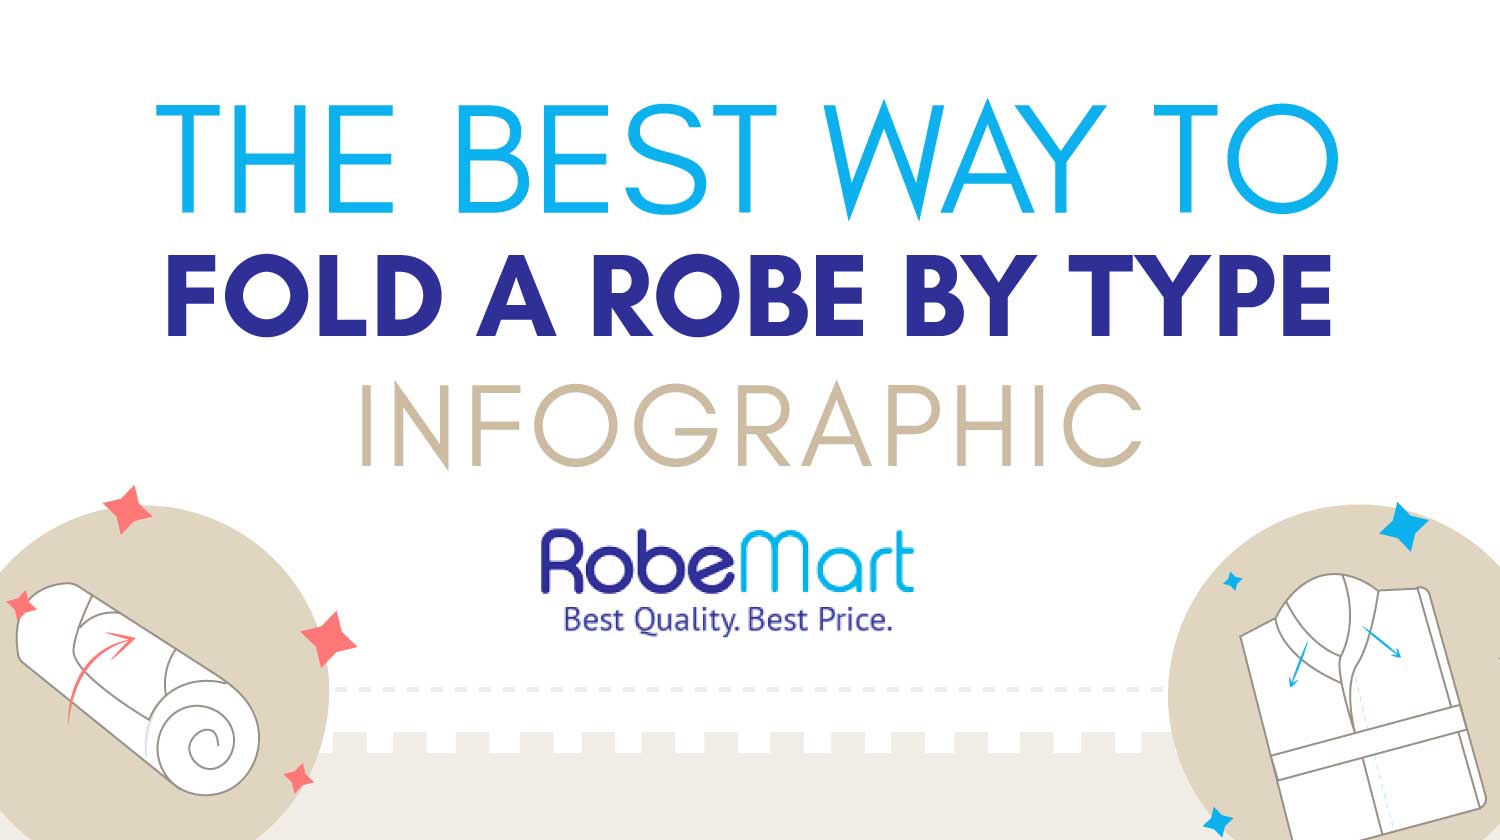 Best Way To Fold A Robe By Type: Bathrobe, Terry Cloth, Silk, Bridesmaid [INFOGRAPHIC]